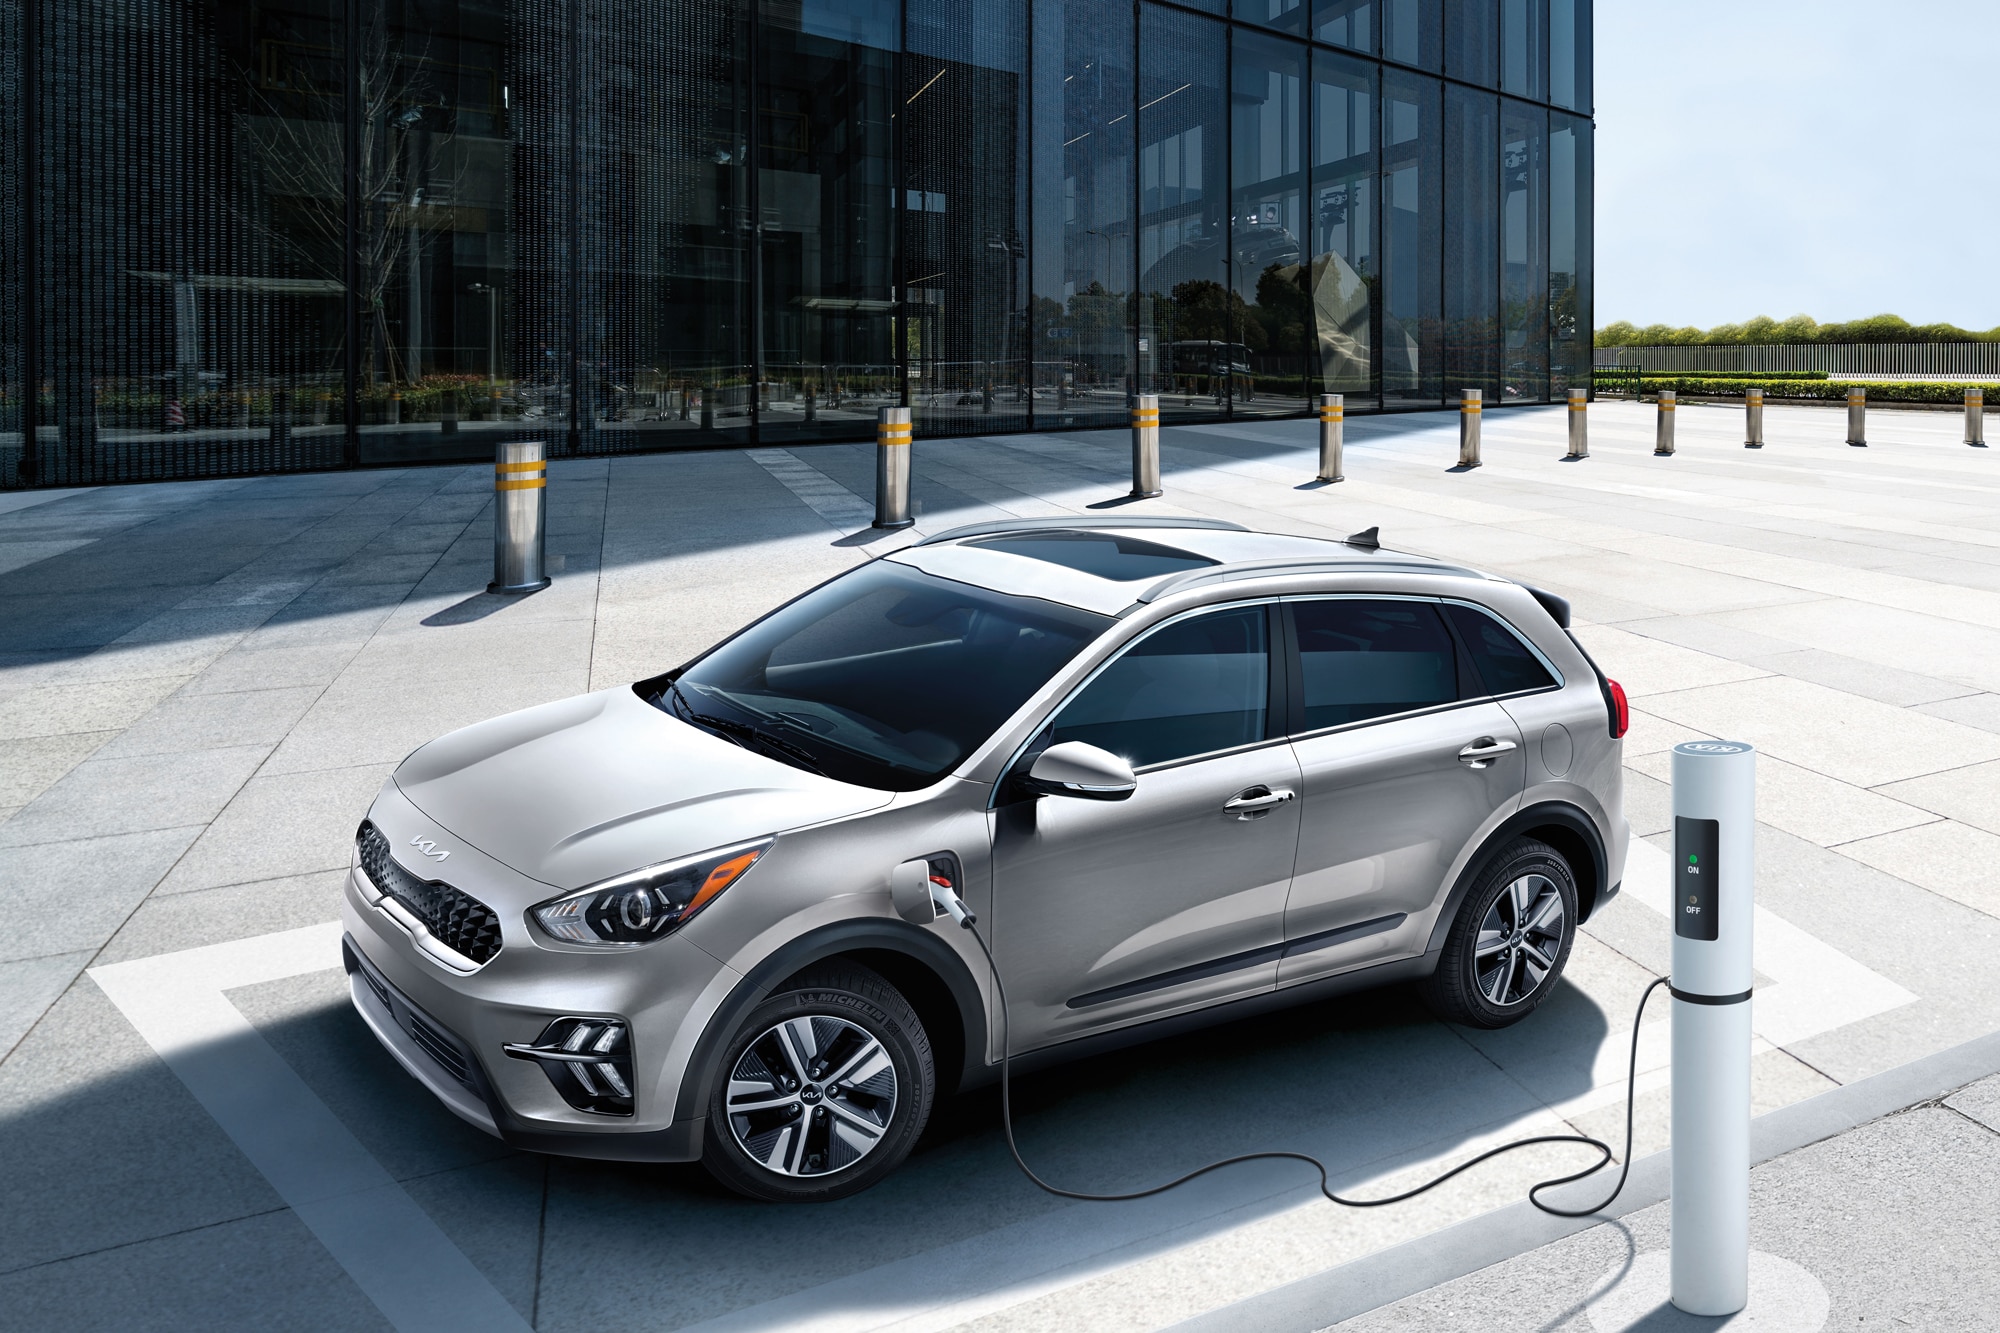 Kia Niro PHEV charging in front of glass building